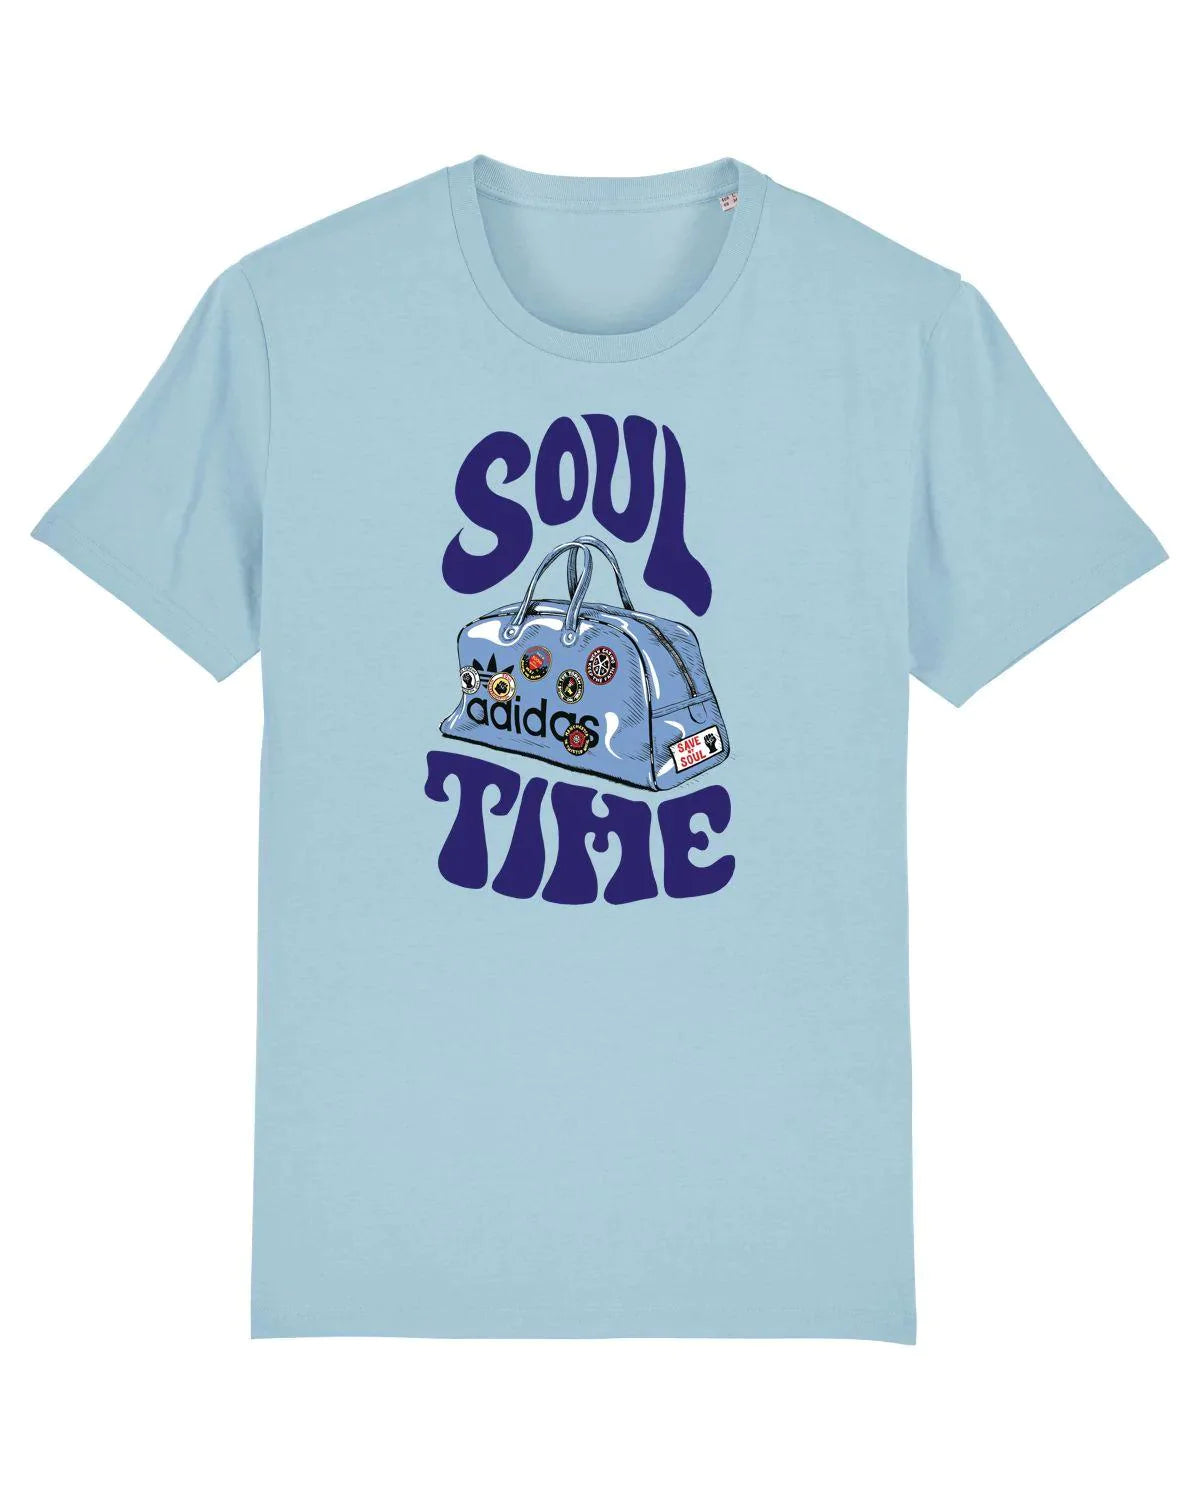 SOUL TIME: T-Shirt Inspired by Northern Soul Allnighters (£ Colours) - SOUND IS COLOUR